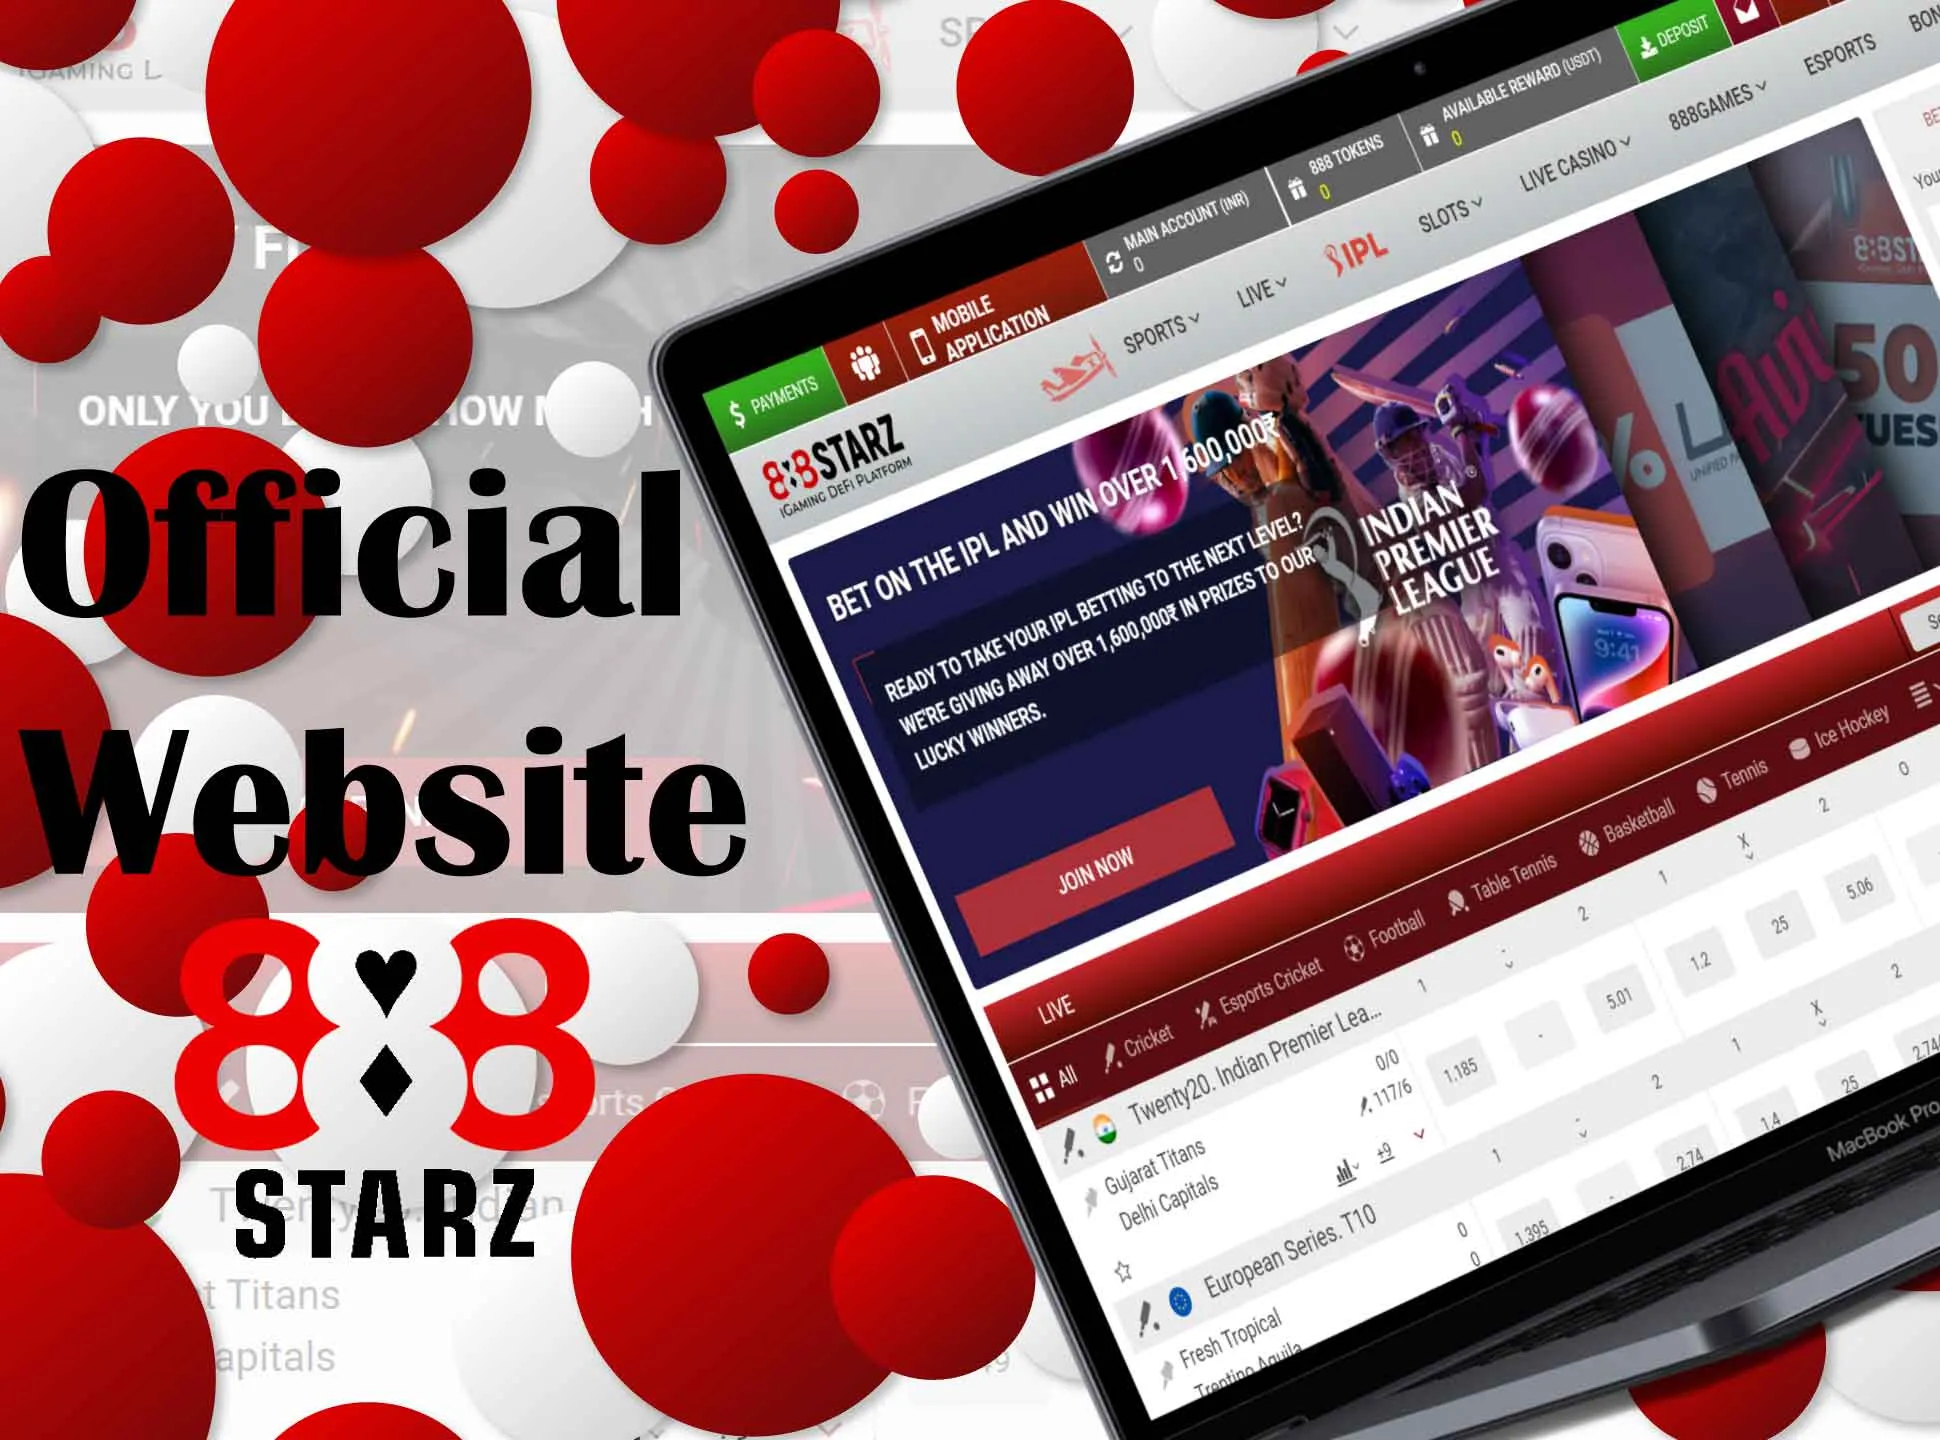 888starz official website has all the features that are necessary for successful and convenient betting.